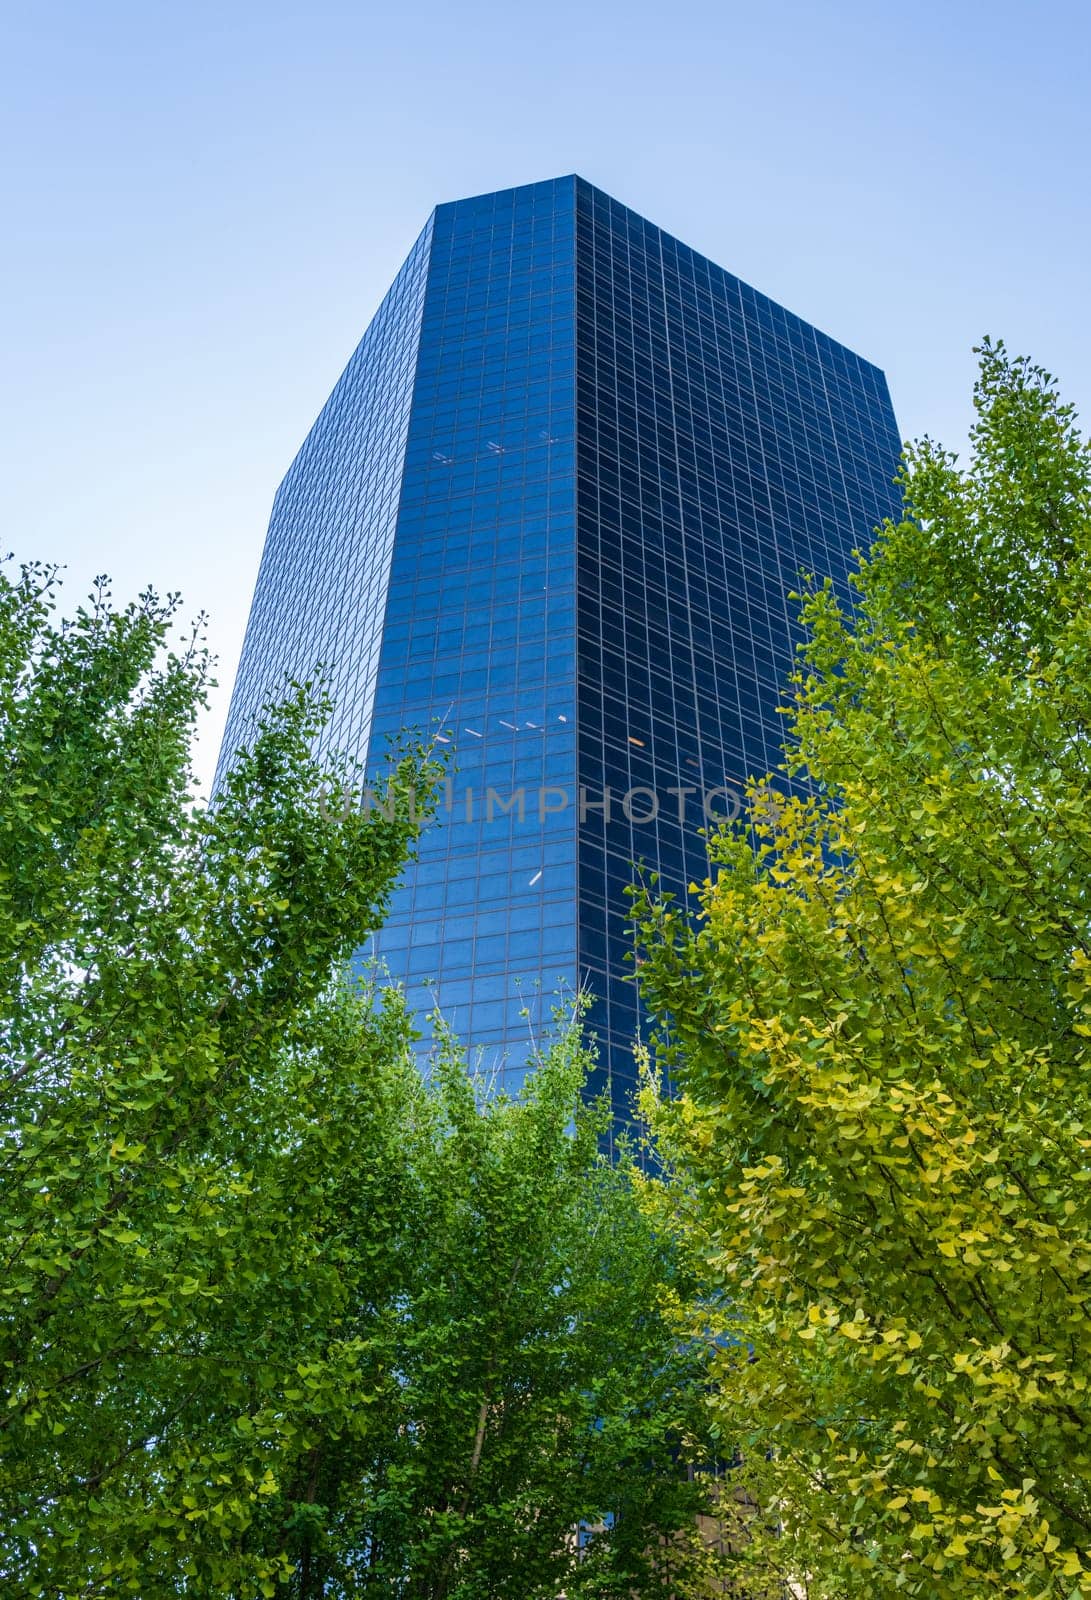 Complex mirrored surface of a modern skyscraper in St Louis by steheap